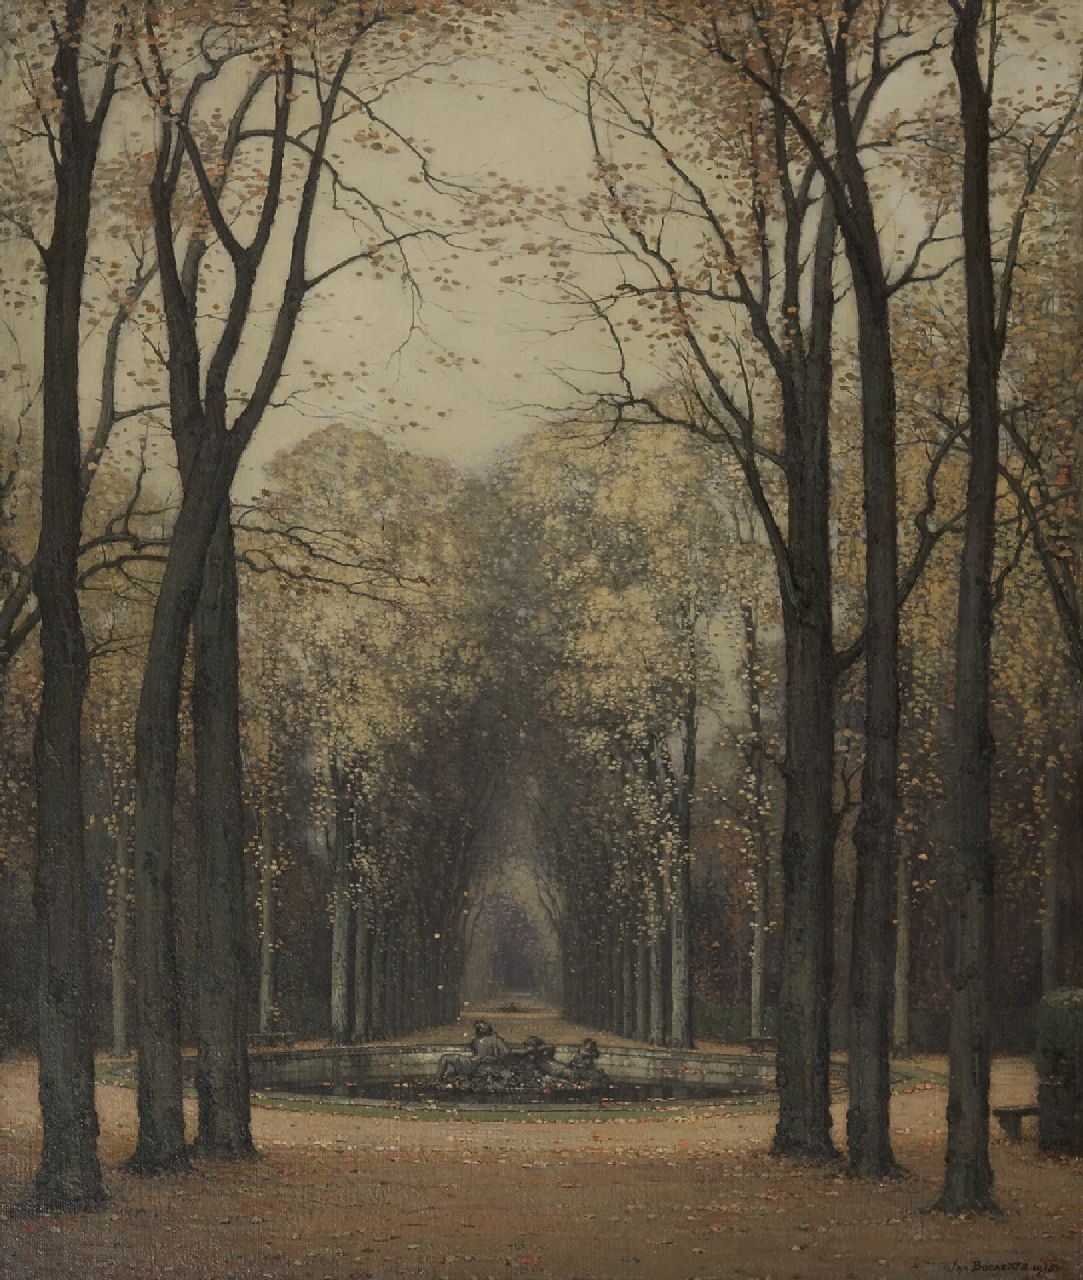 Bogaerts J.J.M.  | Johannes Jacobus Maria 'Jan' Bogaerts | Paintings offered for sale | Autumn at Versailles park, oil on canvas 65.4 x 55.8 cm, signed l.r. and dated 1913